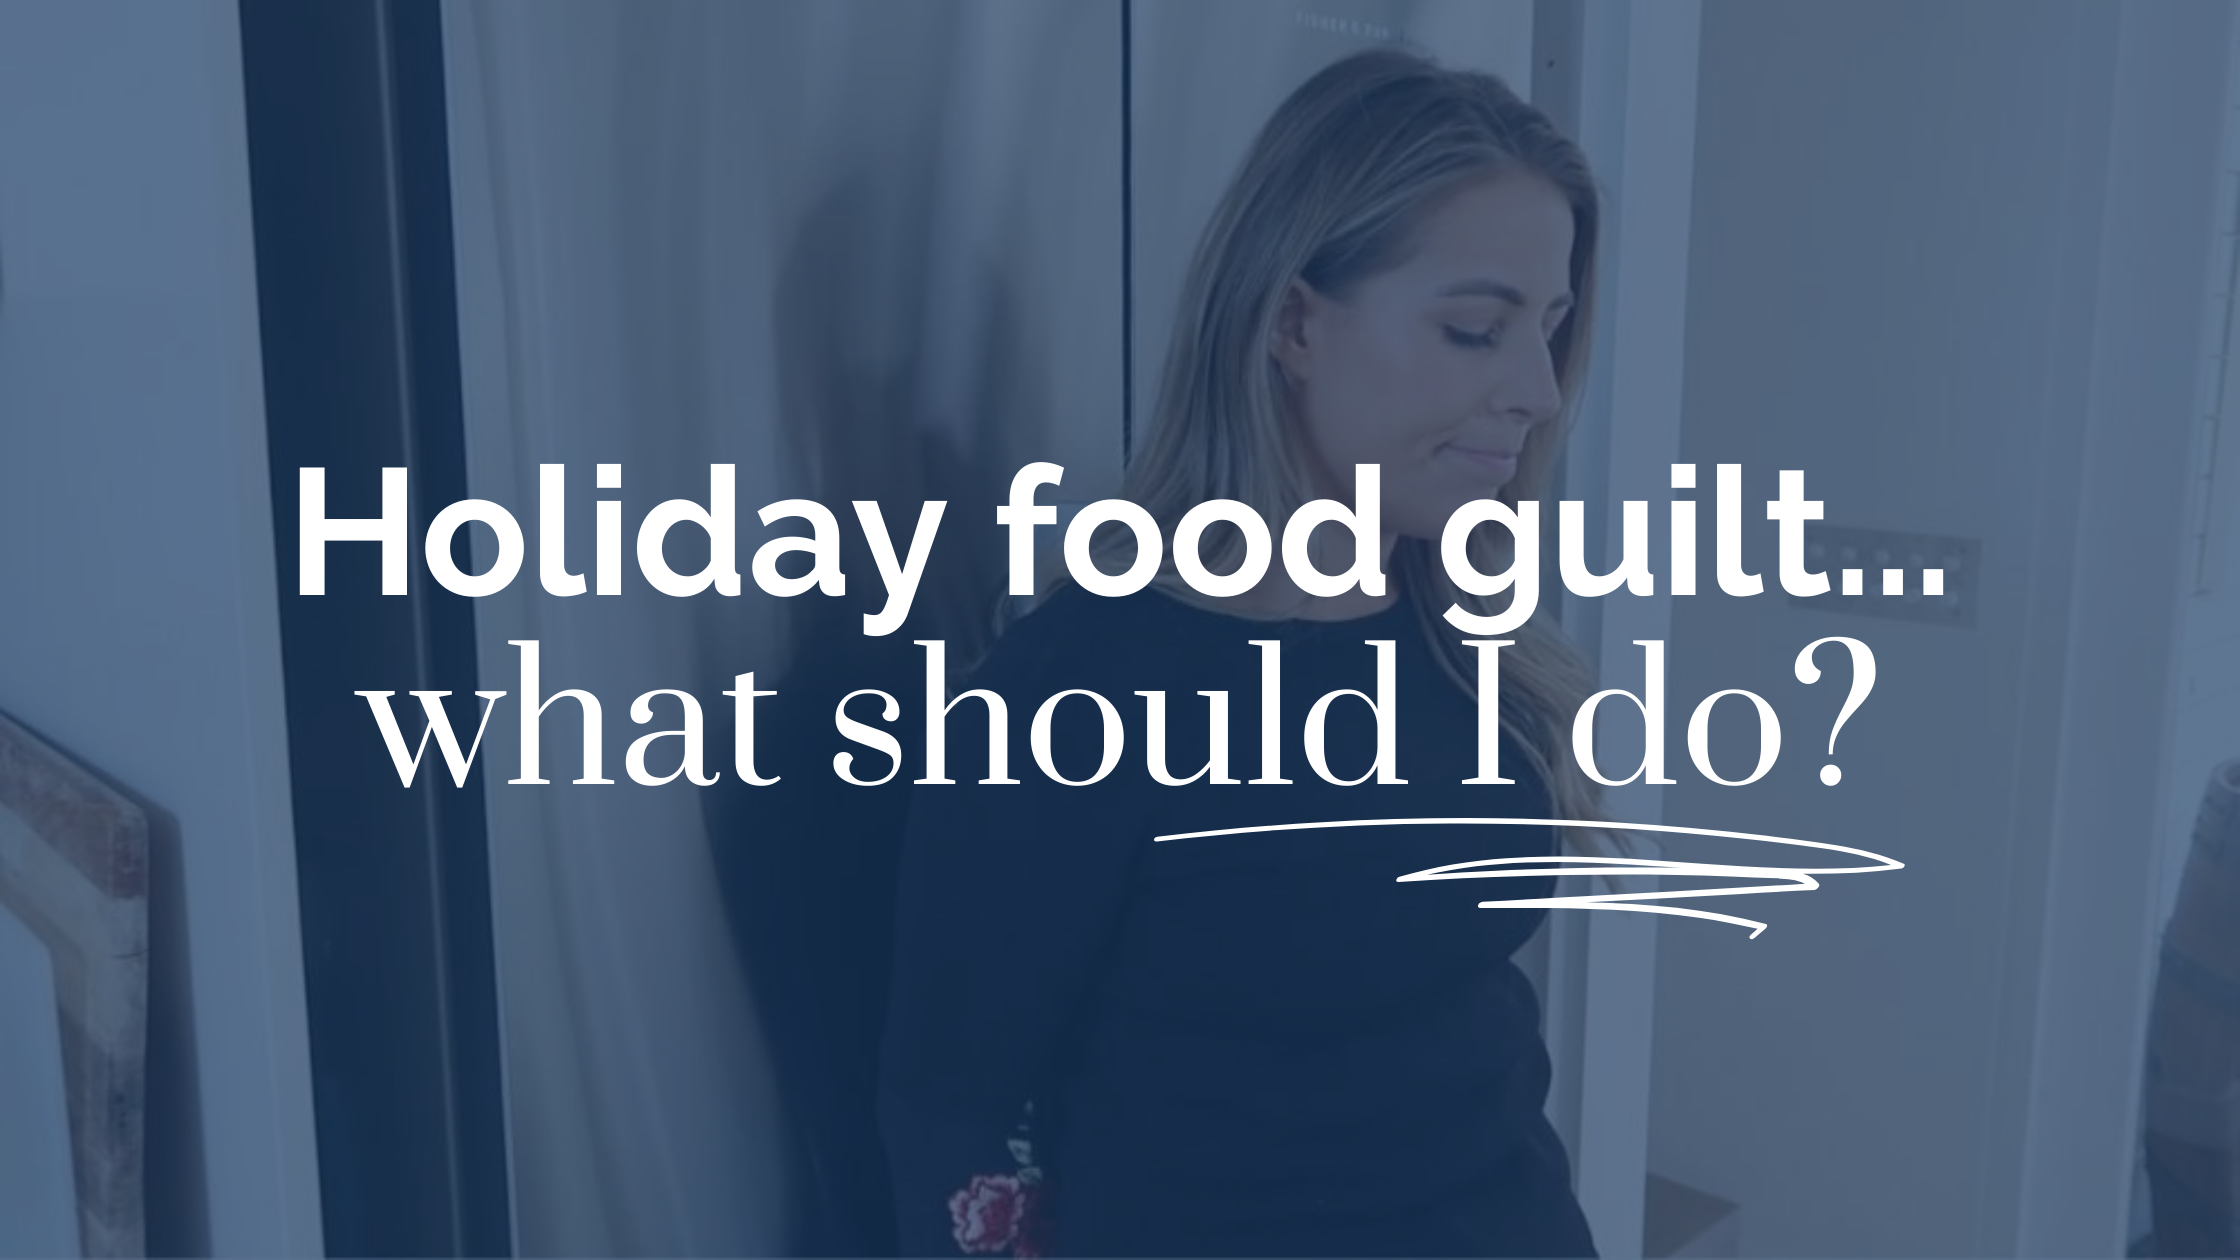 Do you feel guilty for eating over the holidays?